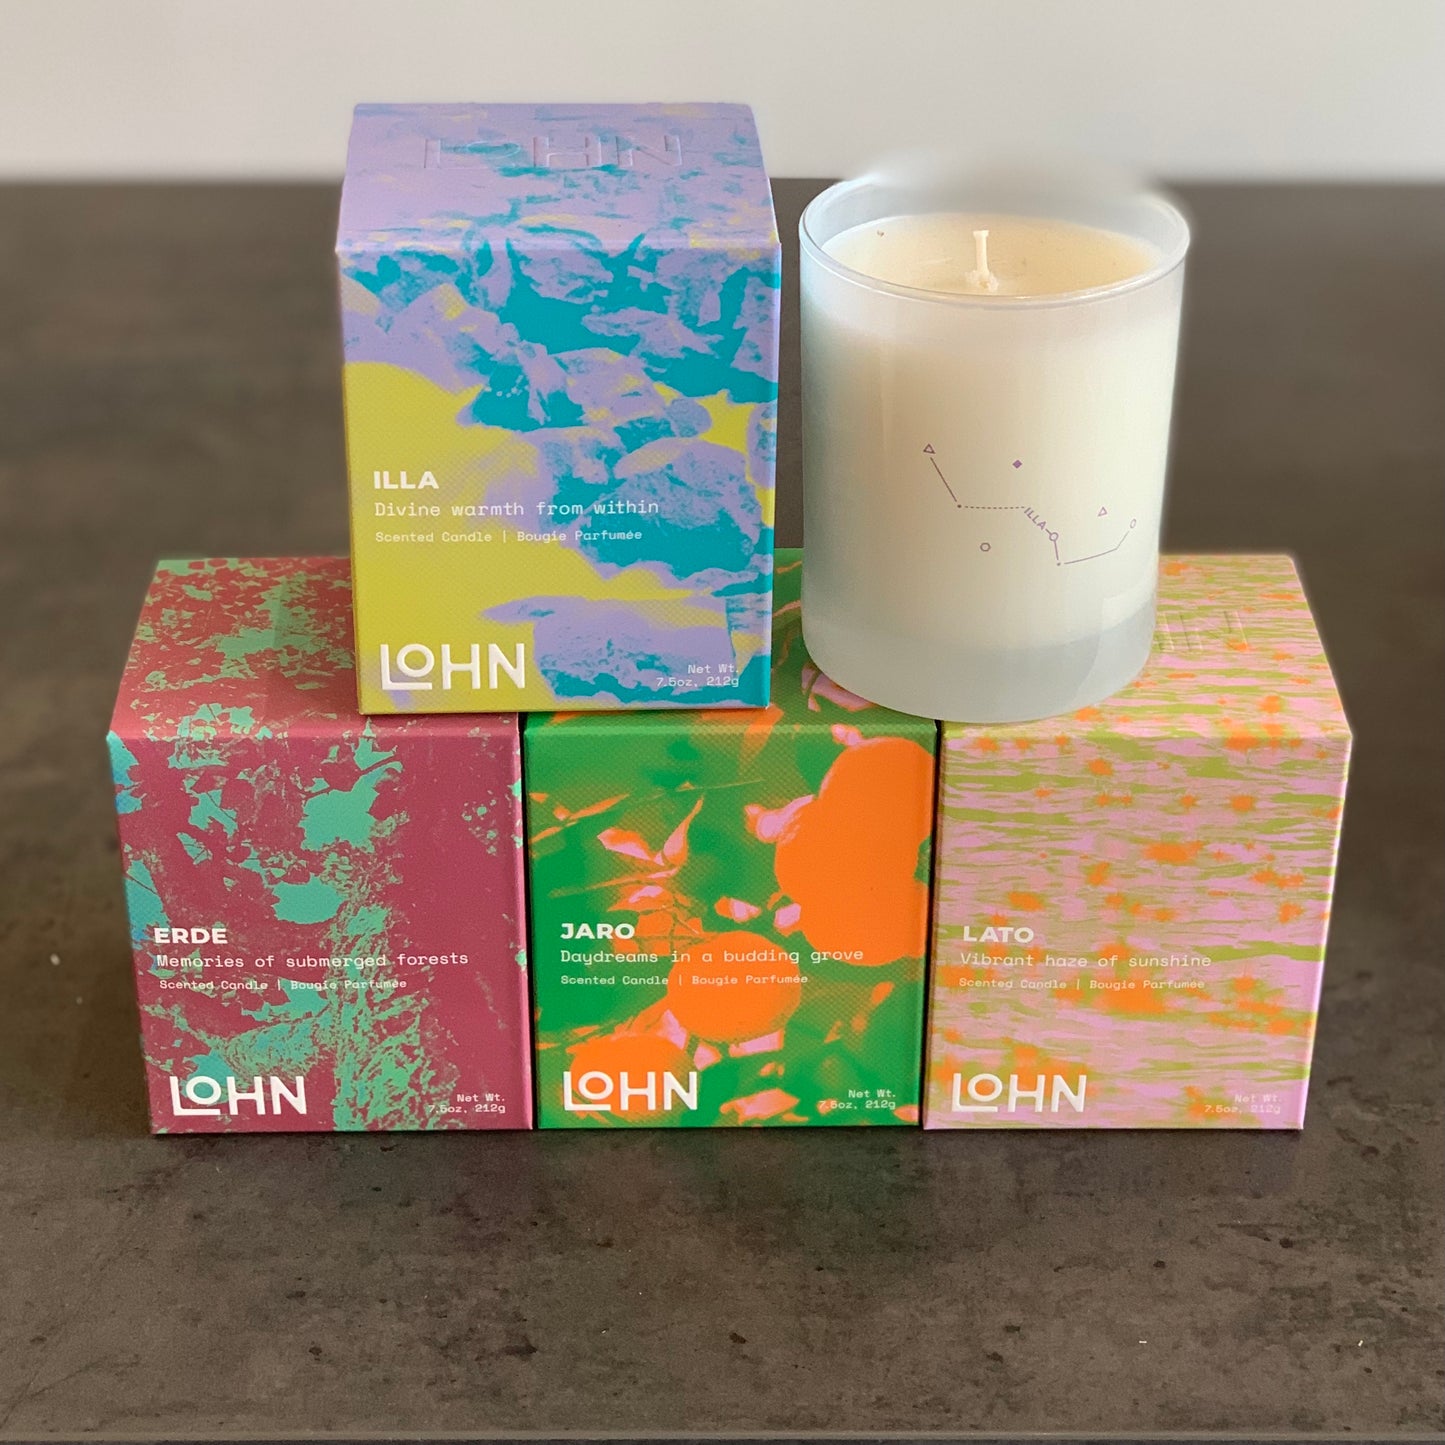 LOHN Scented Candles - Tea, Amber & Spice Road Collections